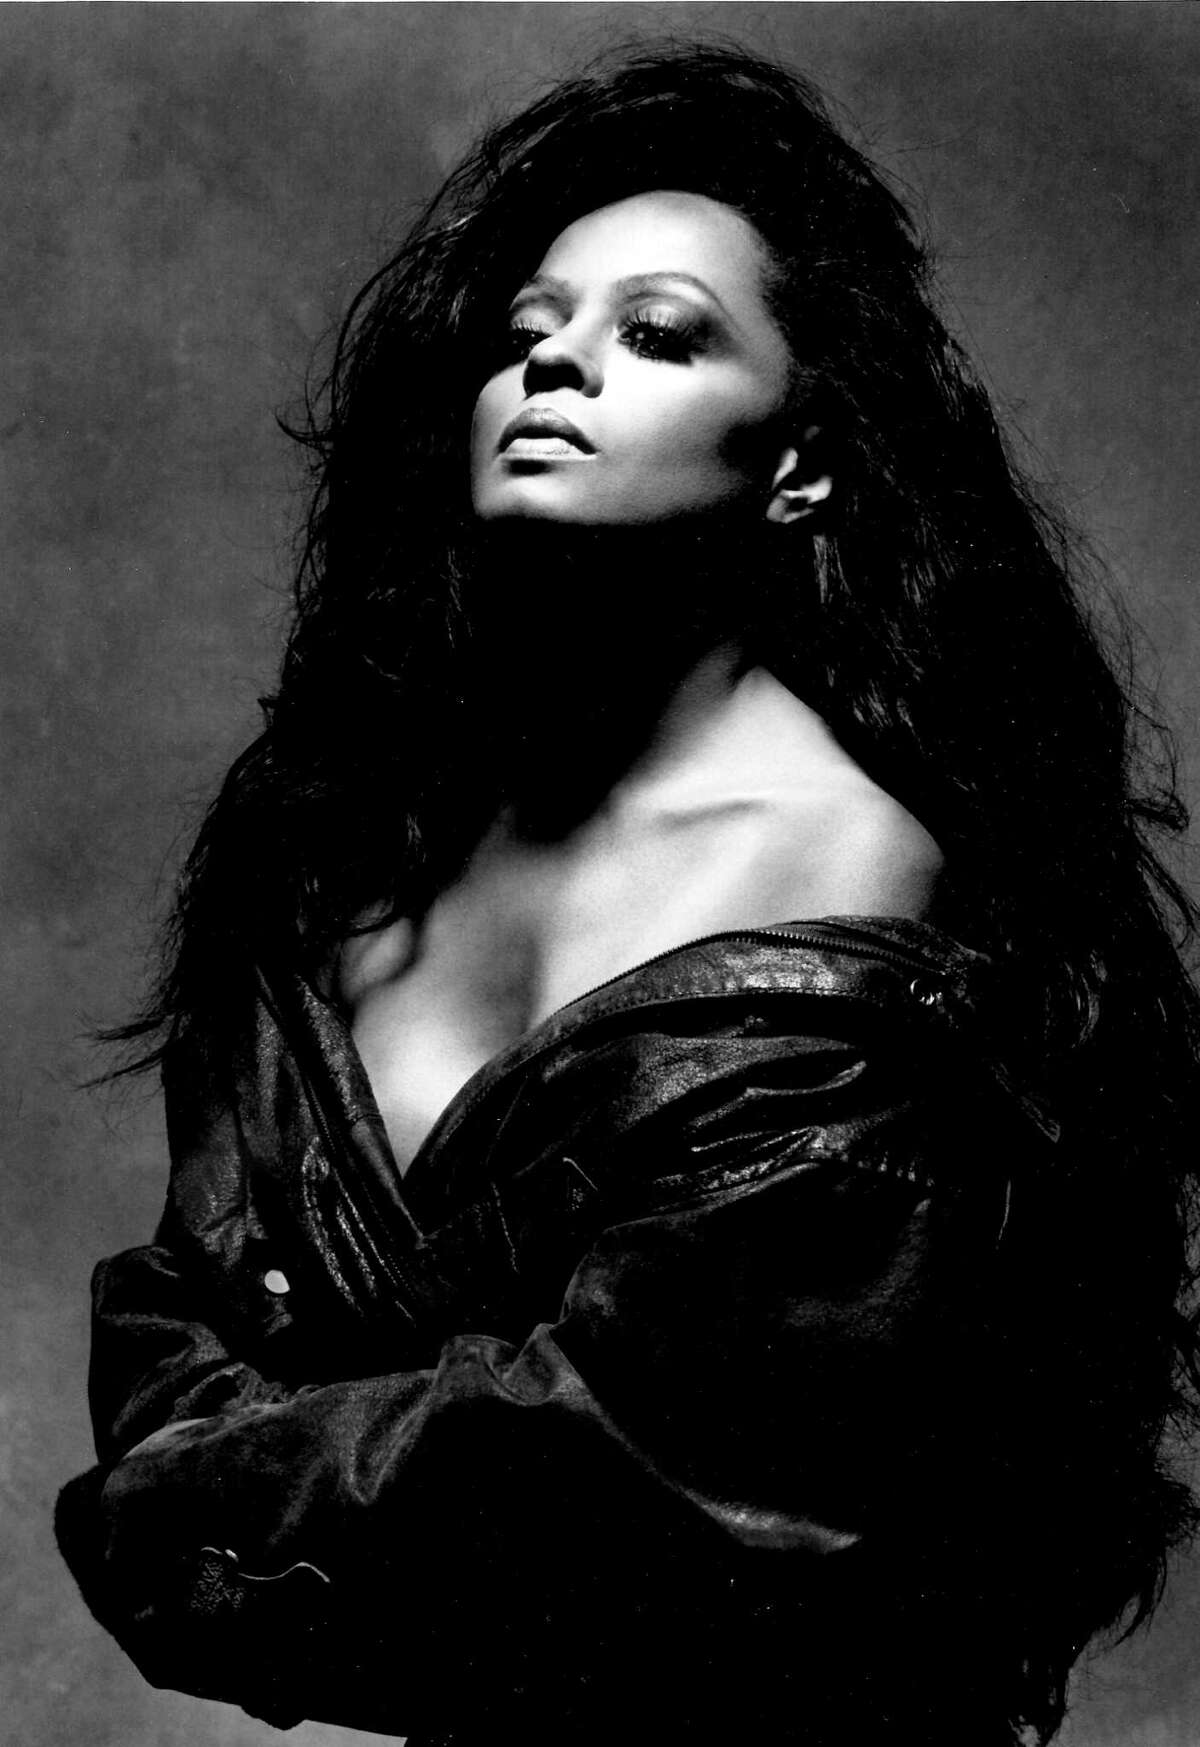 Diana Ross brings her ”In the Name of Love Tour” to Foxwoods Grand Theater on Sunday, July 30.